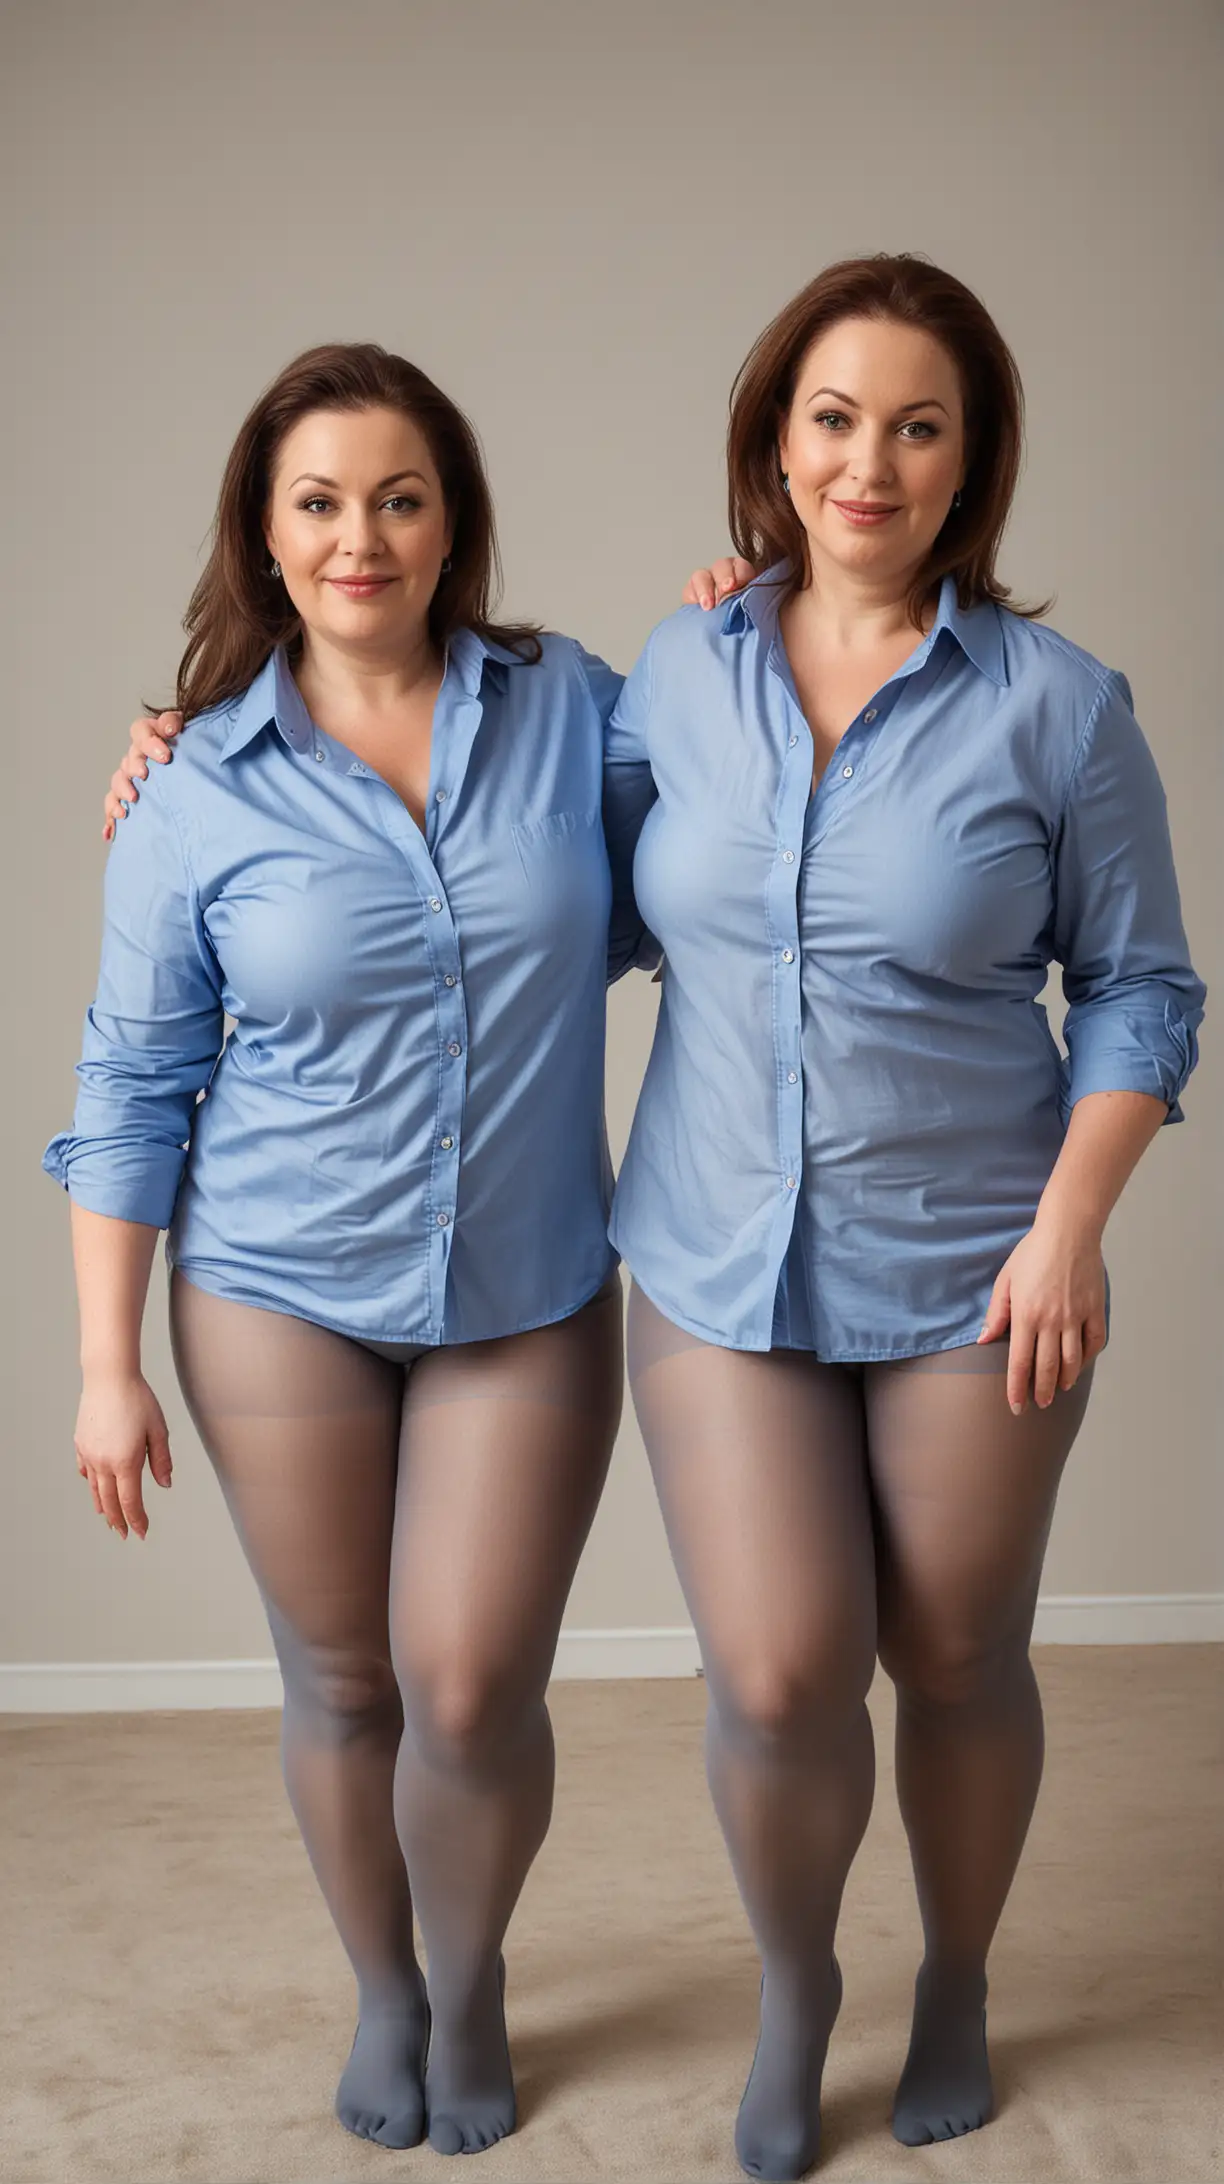 Mature, Curvy Beautiful Sisters, each wearing untucked blue stretch button shirts, Gray Pantyhose, playfully do exercise squats while teasing, poking and tickling each other.